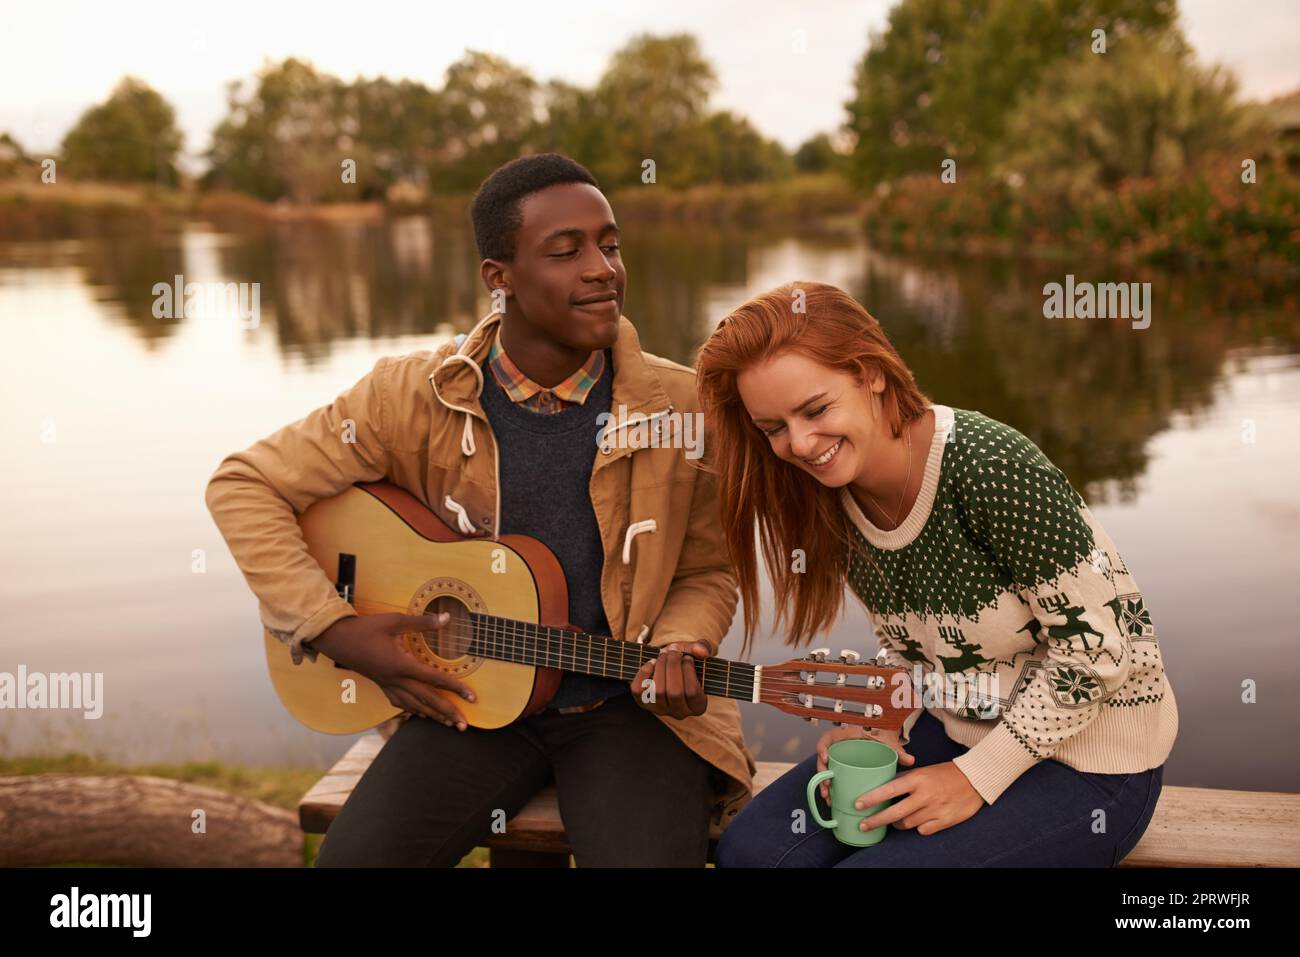 He knows that the key to her heart is laughter. a teenage boy serenading a beautiful girl while sitting beside a lake. Stock Photo